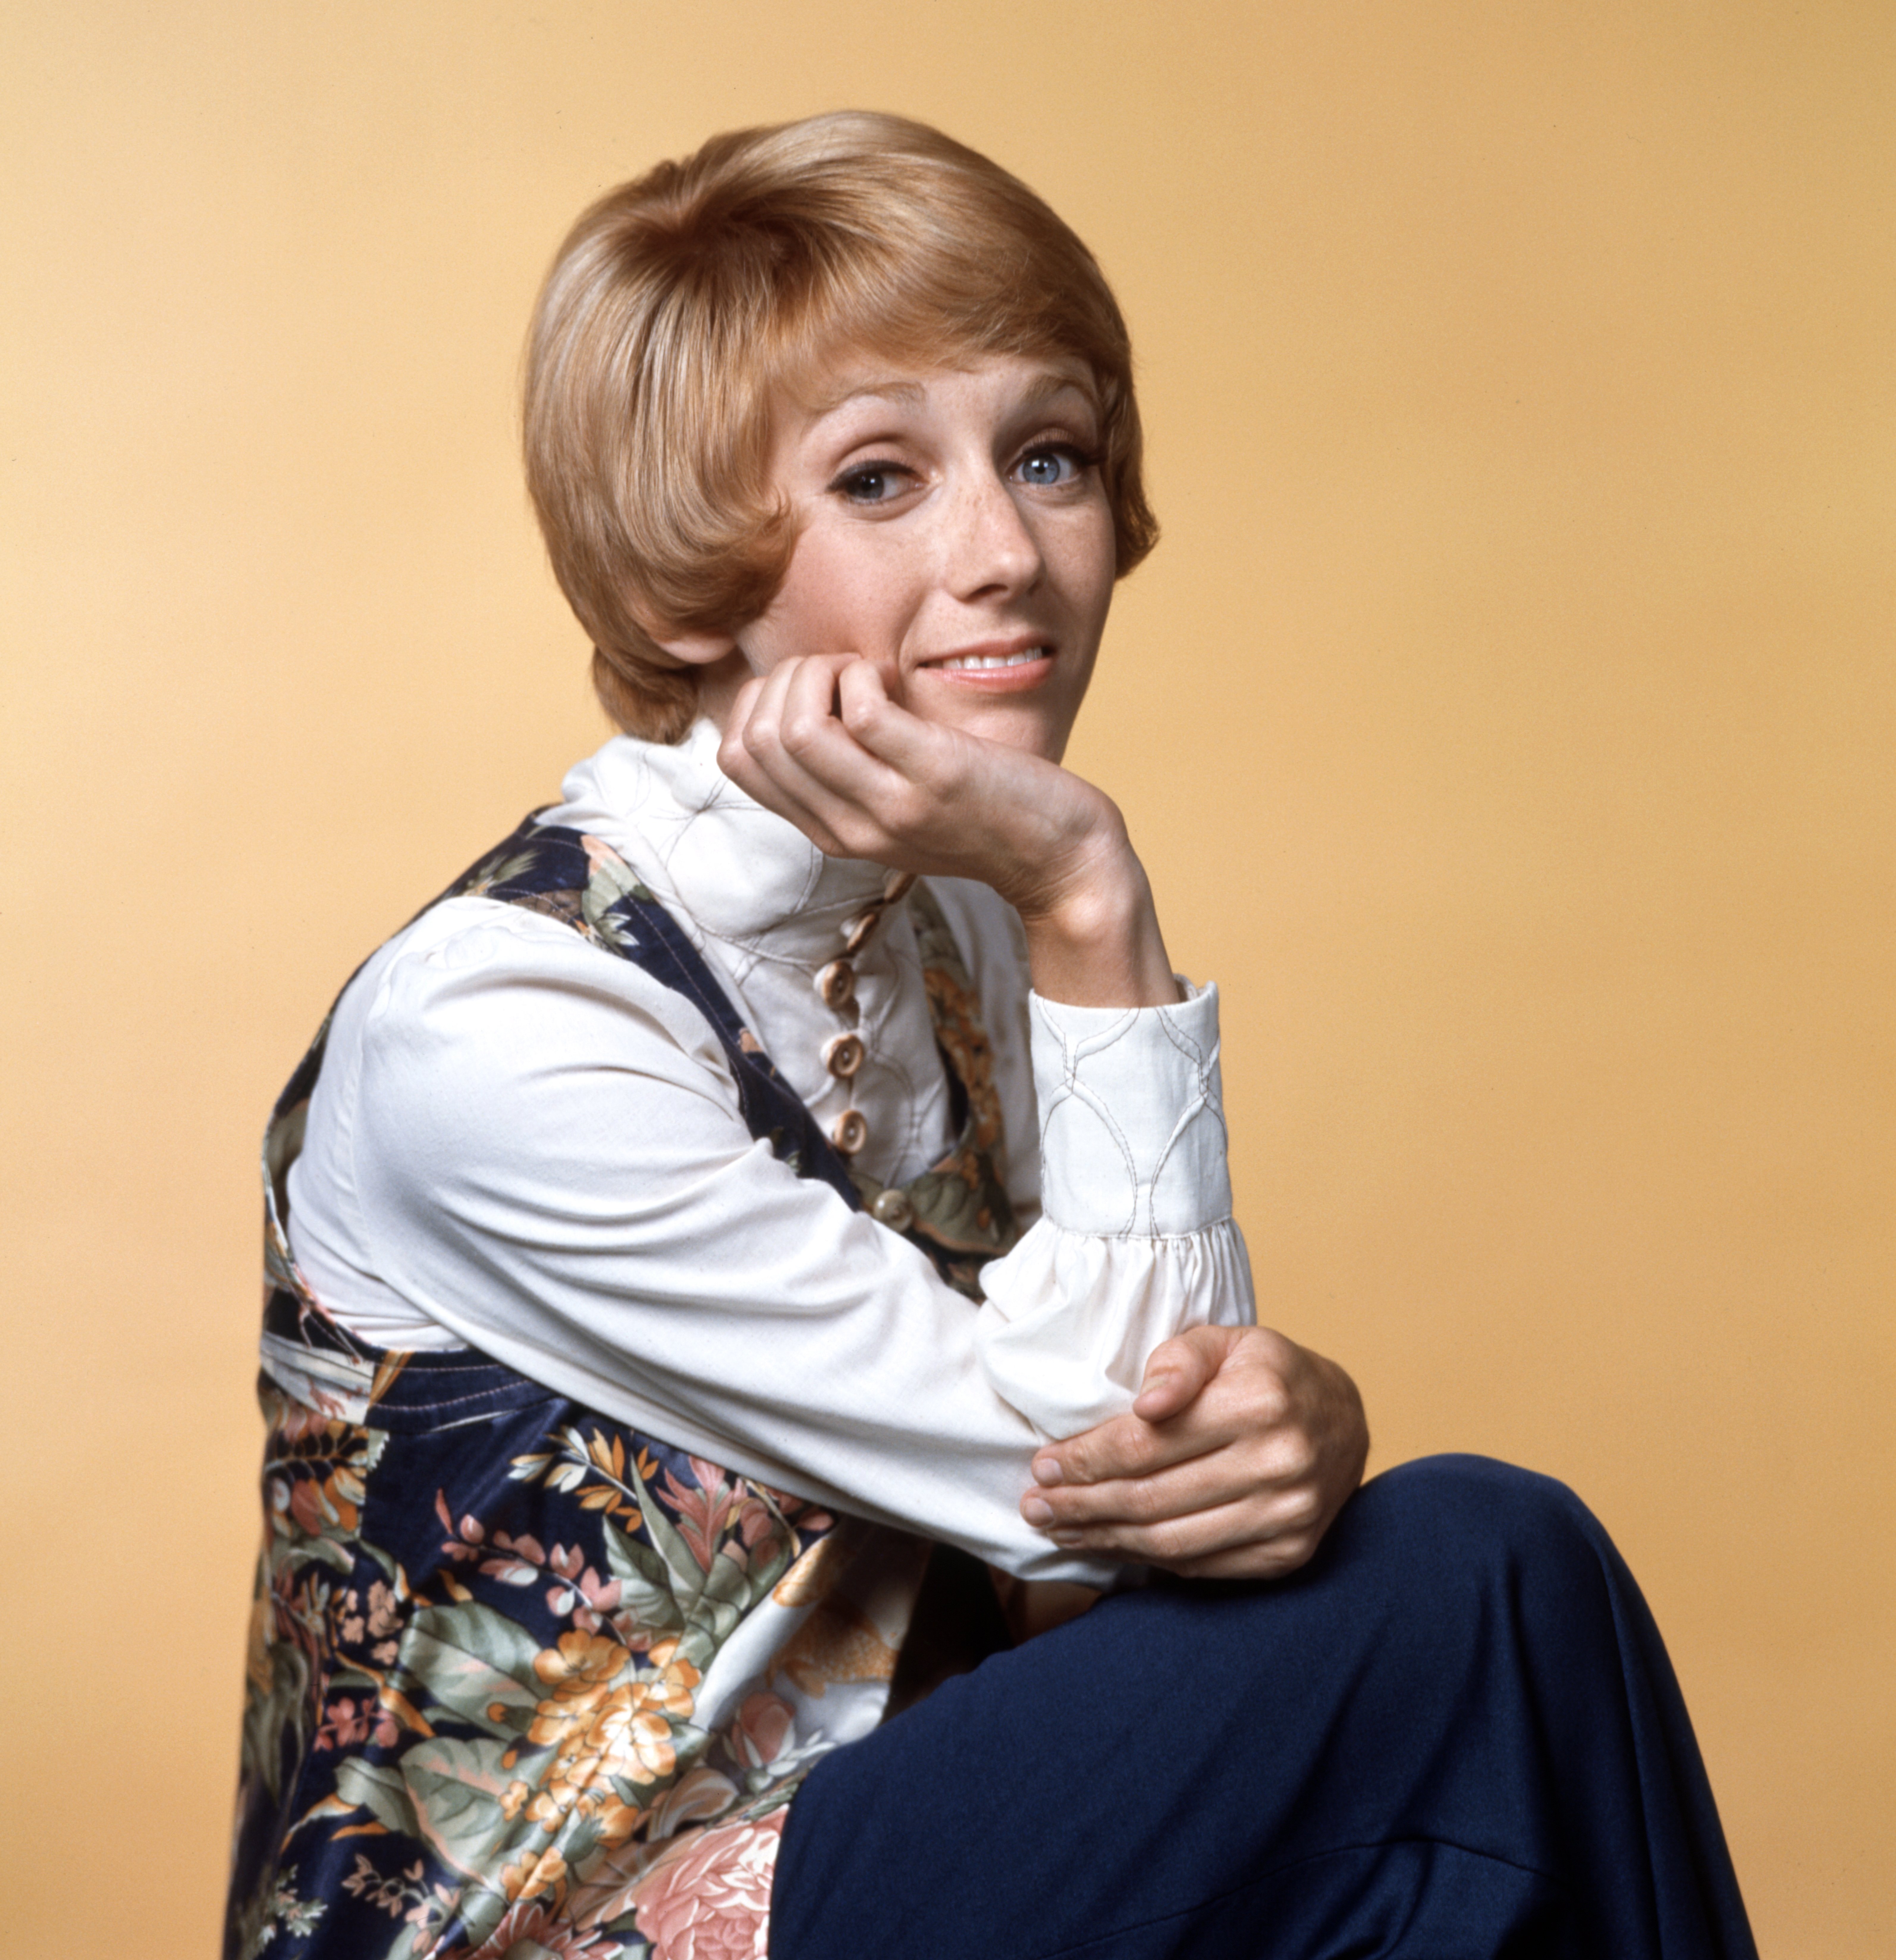 Sandy Duncan in "The Sandy Duncan Show," September 17, 1972 | Source: Getty Images